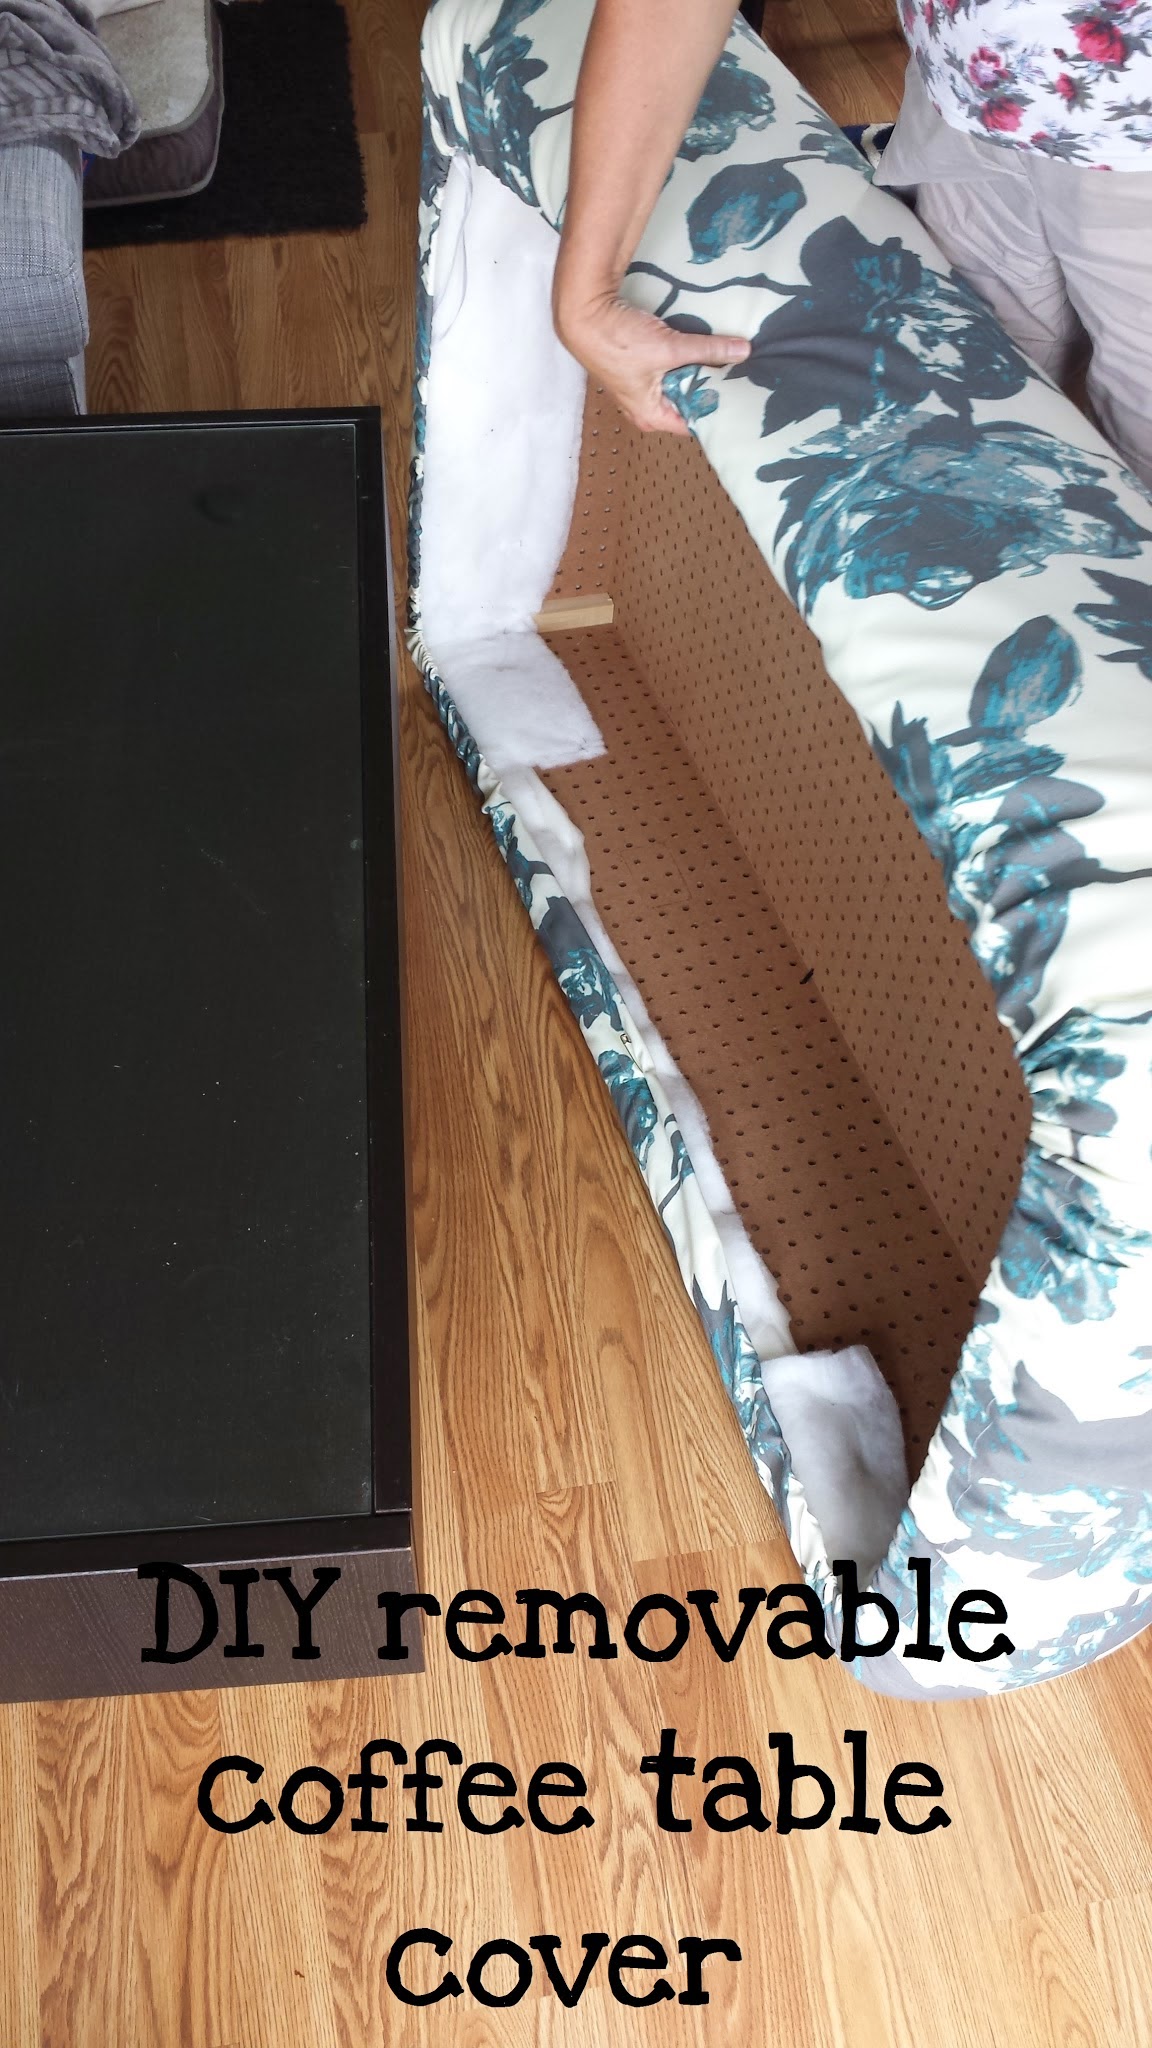 I need help baby-proofing my coffee table! : r/daddit